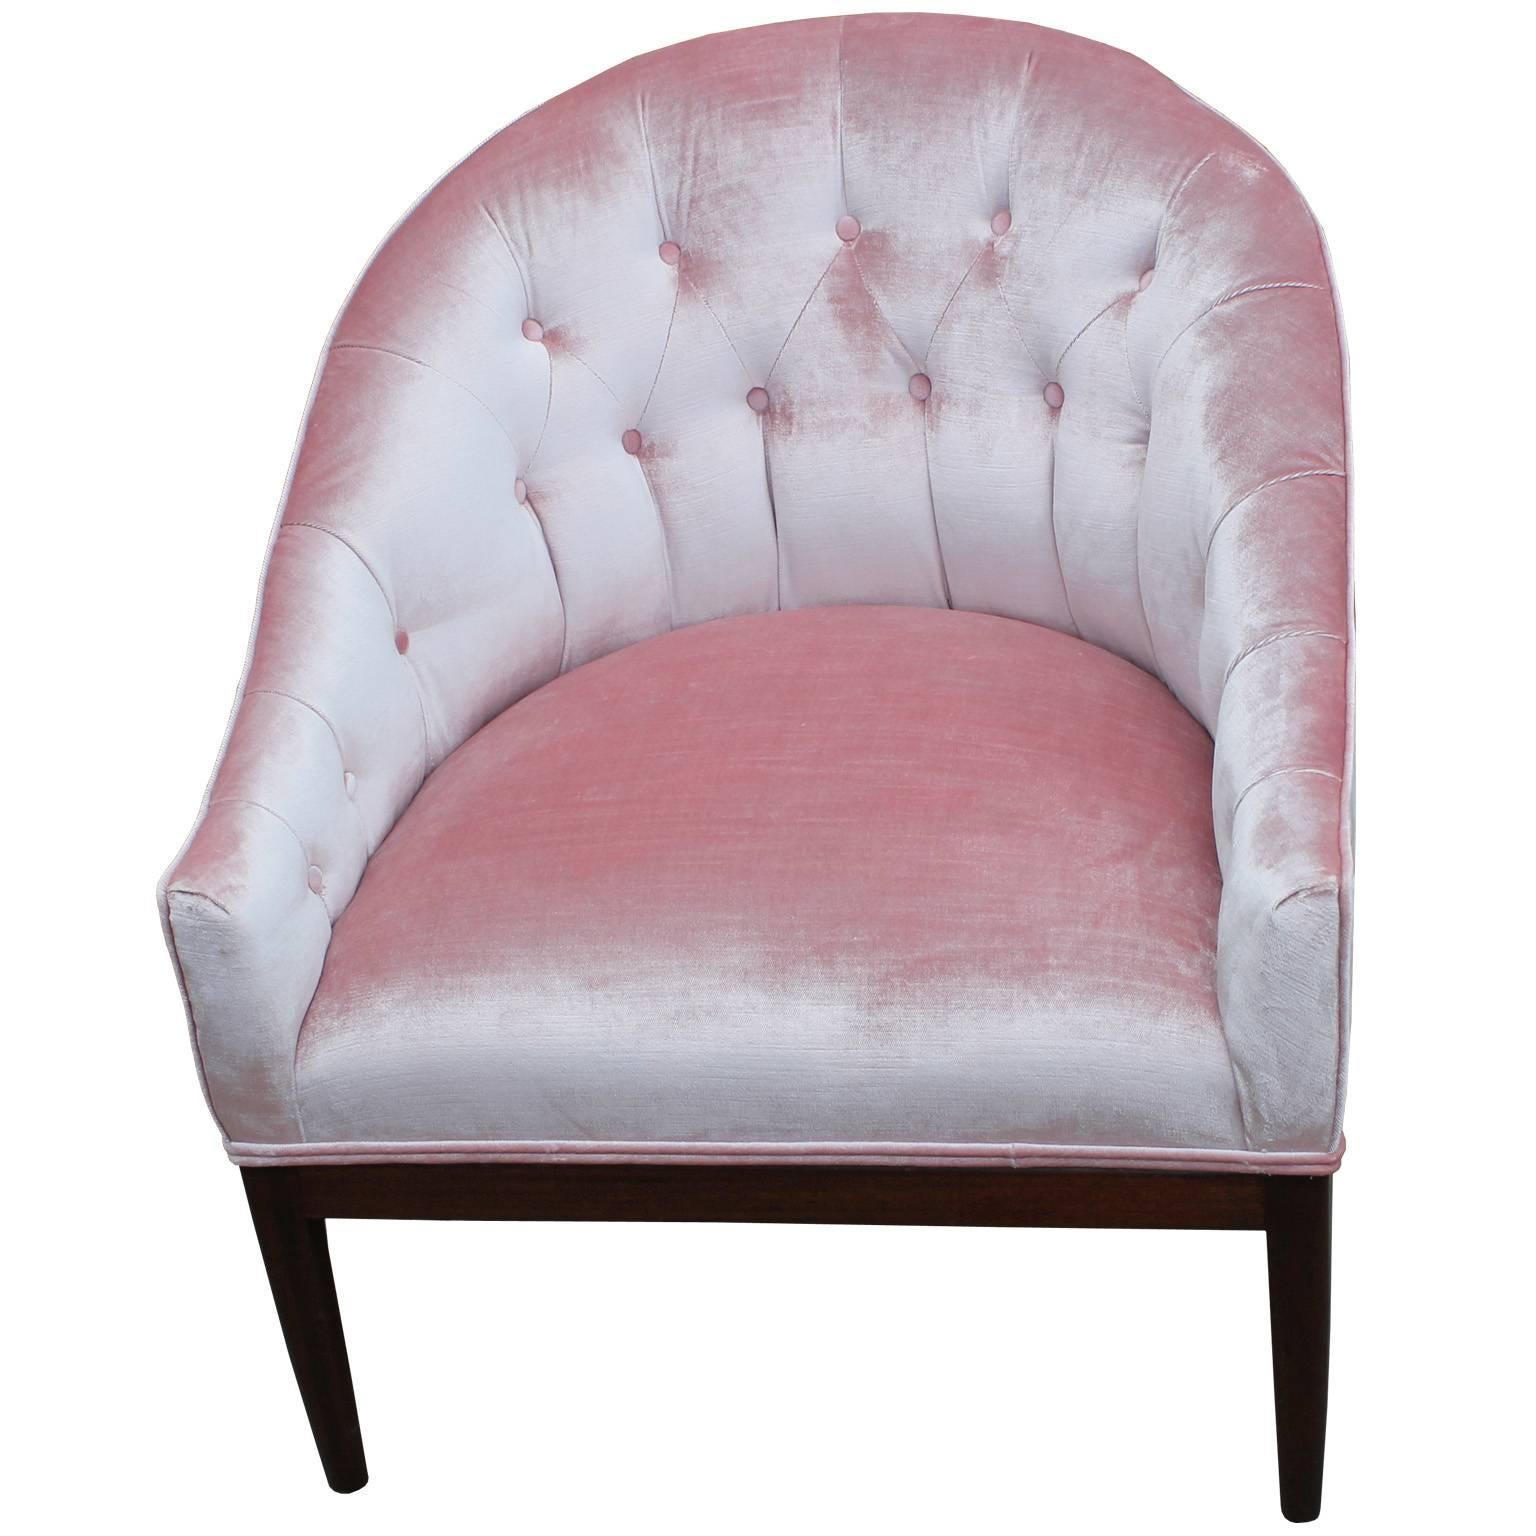 Glamorous pair of barrel back lounge chairs. Chairs are upholstered in a luxe, silky pale pink velvet. Tufting adds visual interest and comfort. Bases are finished in a dark walnut. Perfect in a Hollywood regency or Mid-Century space.